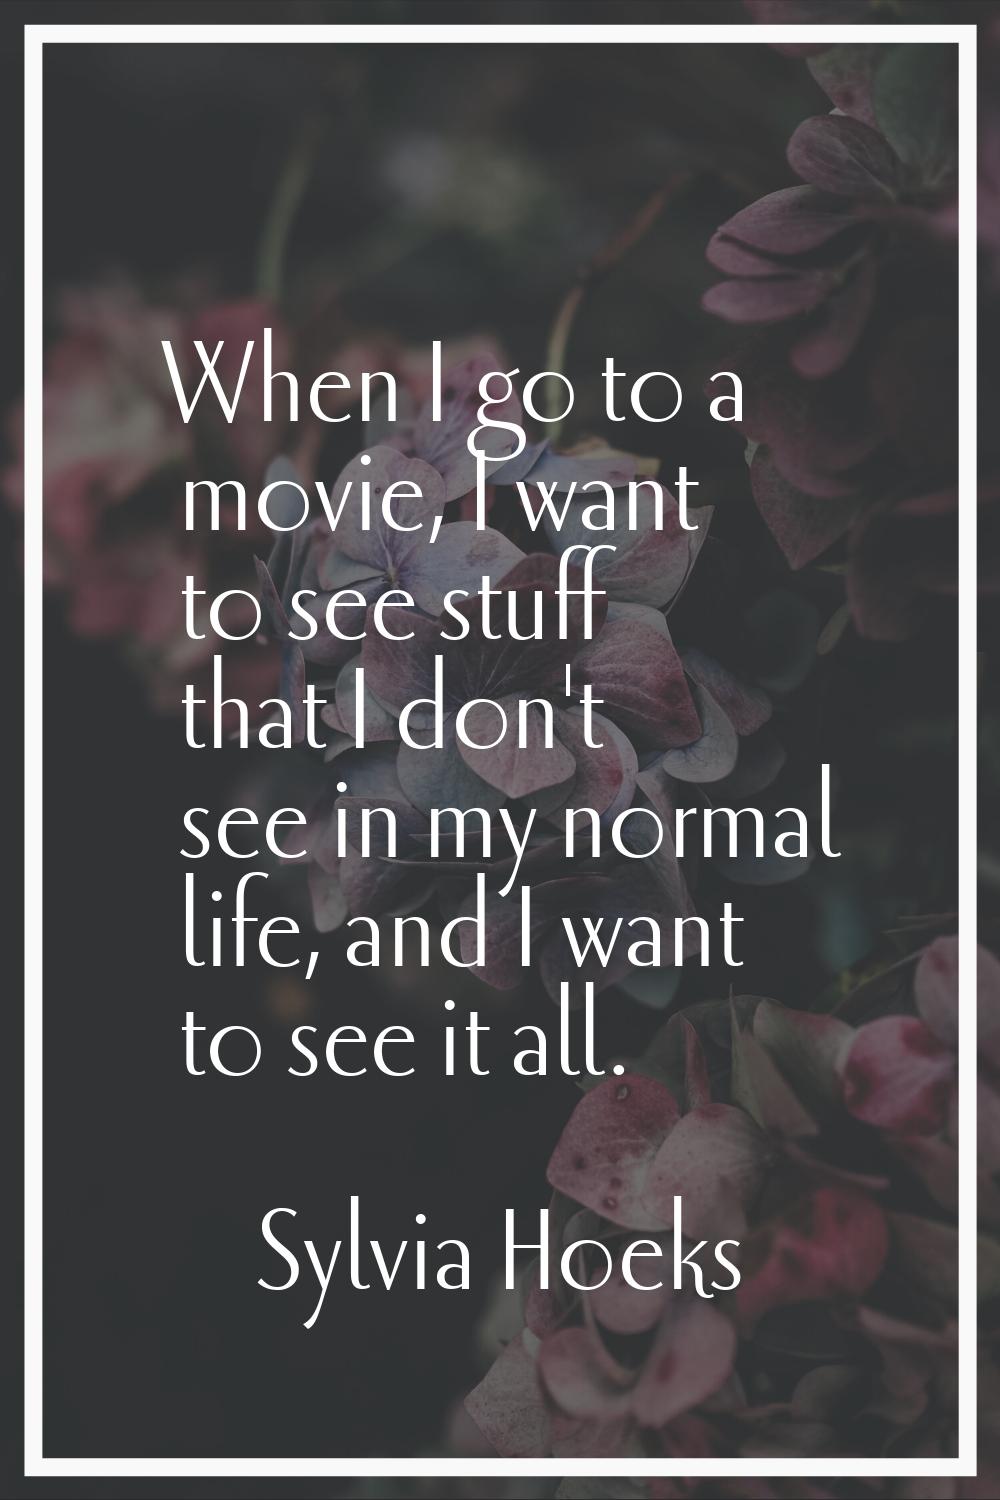 When I go to a movie, I want to see stuff that I don't see in my normal life, and I want to see it 